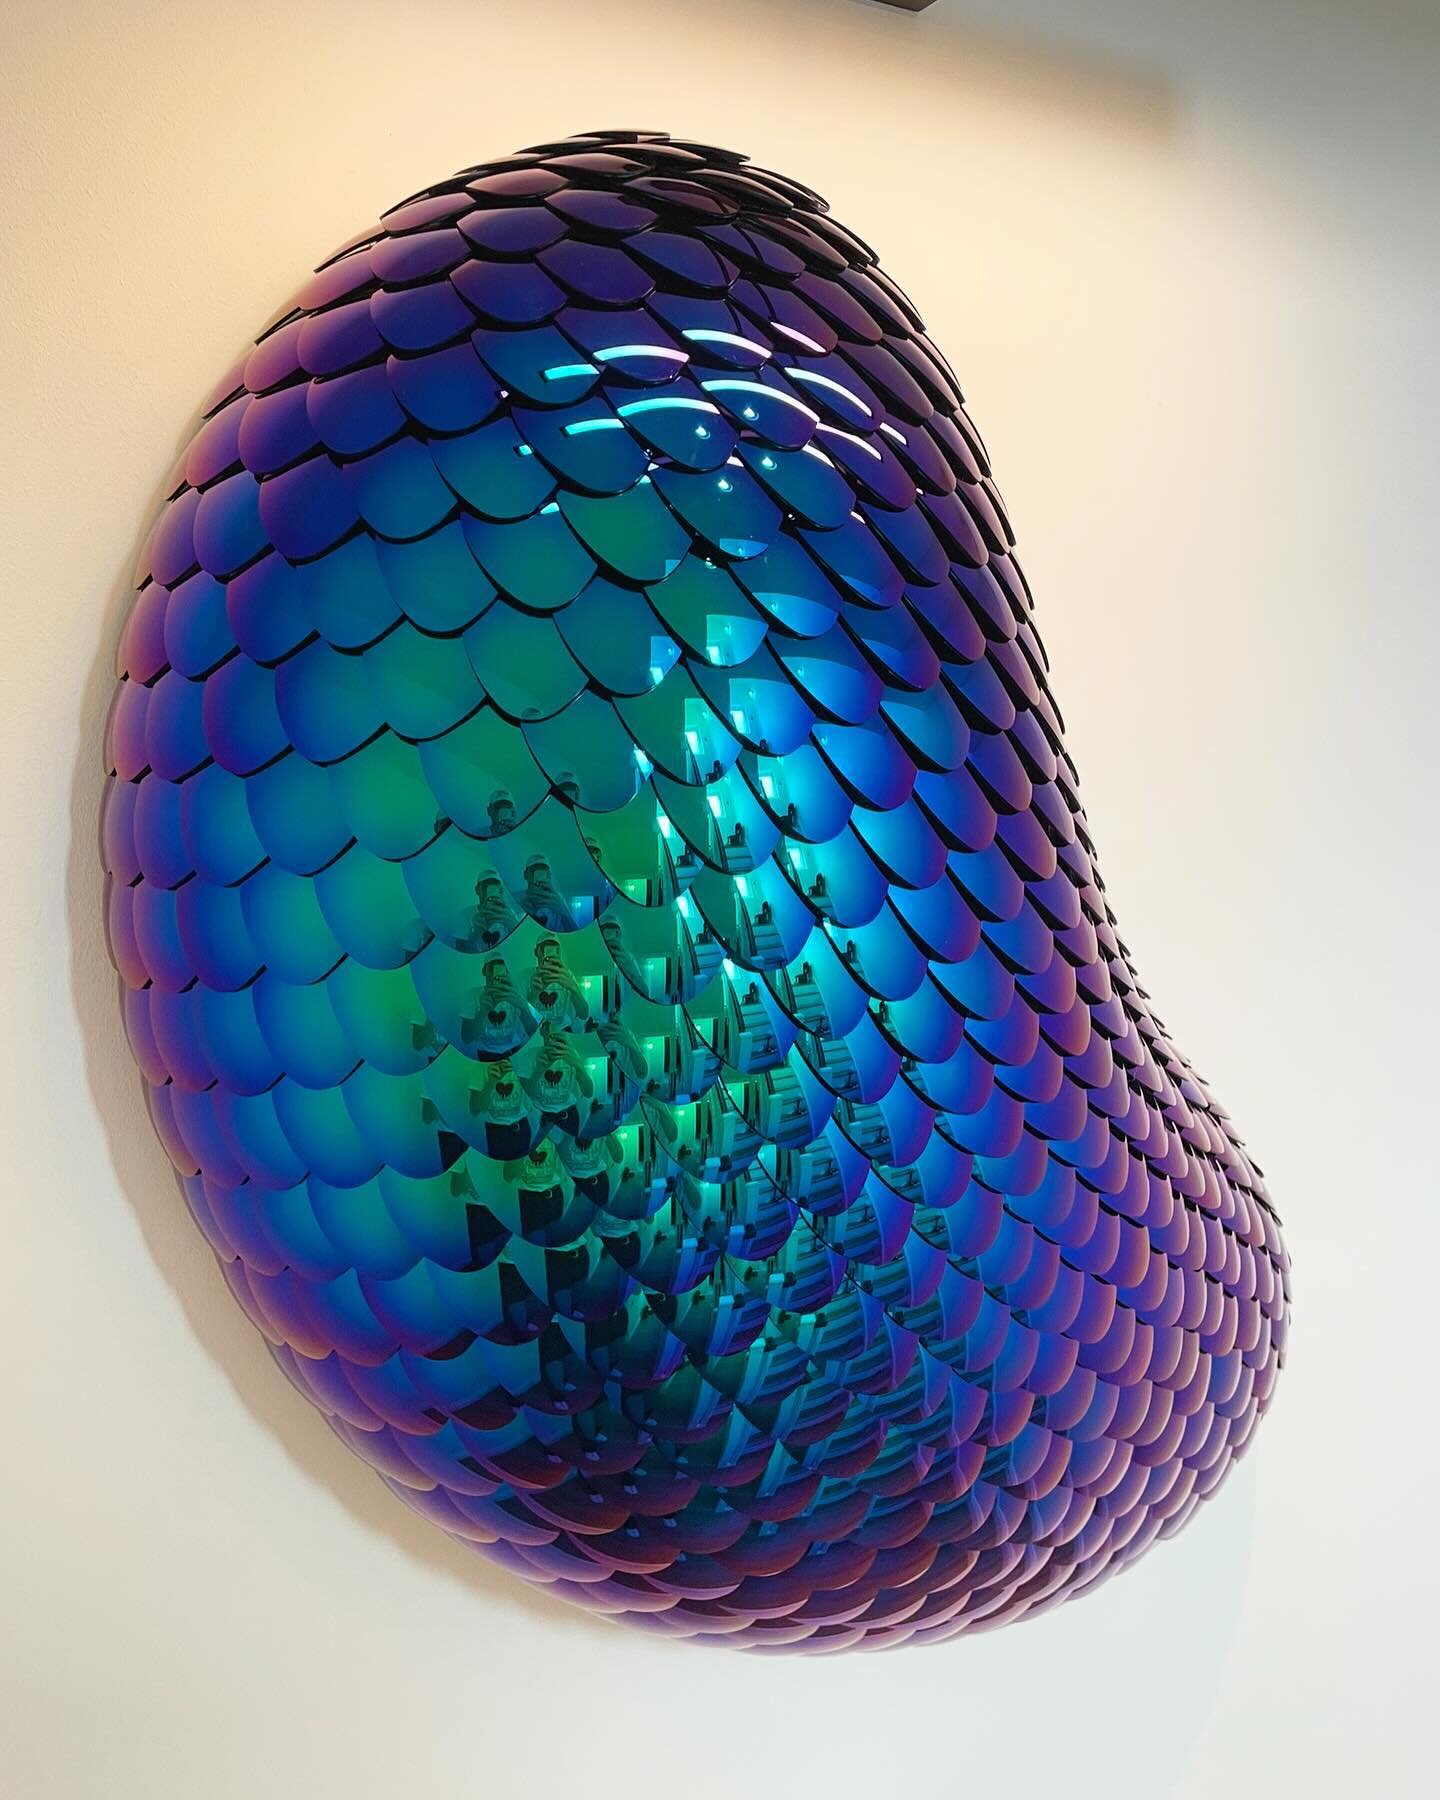 A stunning other worldly piece for one of our private clients homes by @eelcohilgersom we are so glad we got to get this incredible 3D wall sculpture from one of our favourite international artists to London.

Eelco Hilgersom works are conceived by t